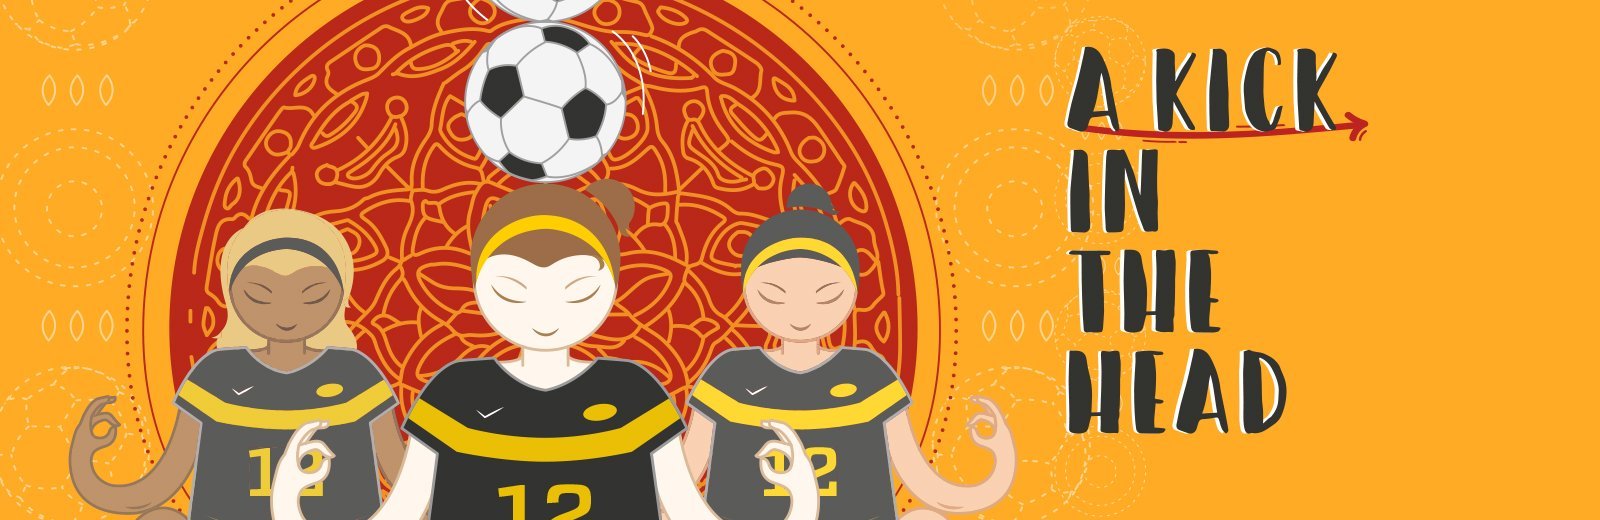 A Kick in the Head text next to an illustration of soccer players meditating.